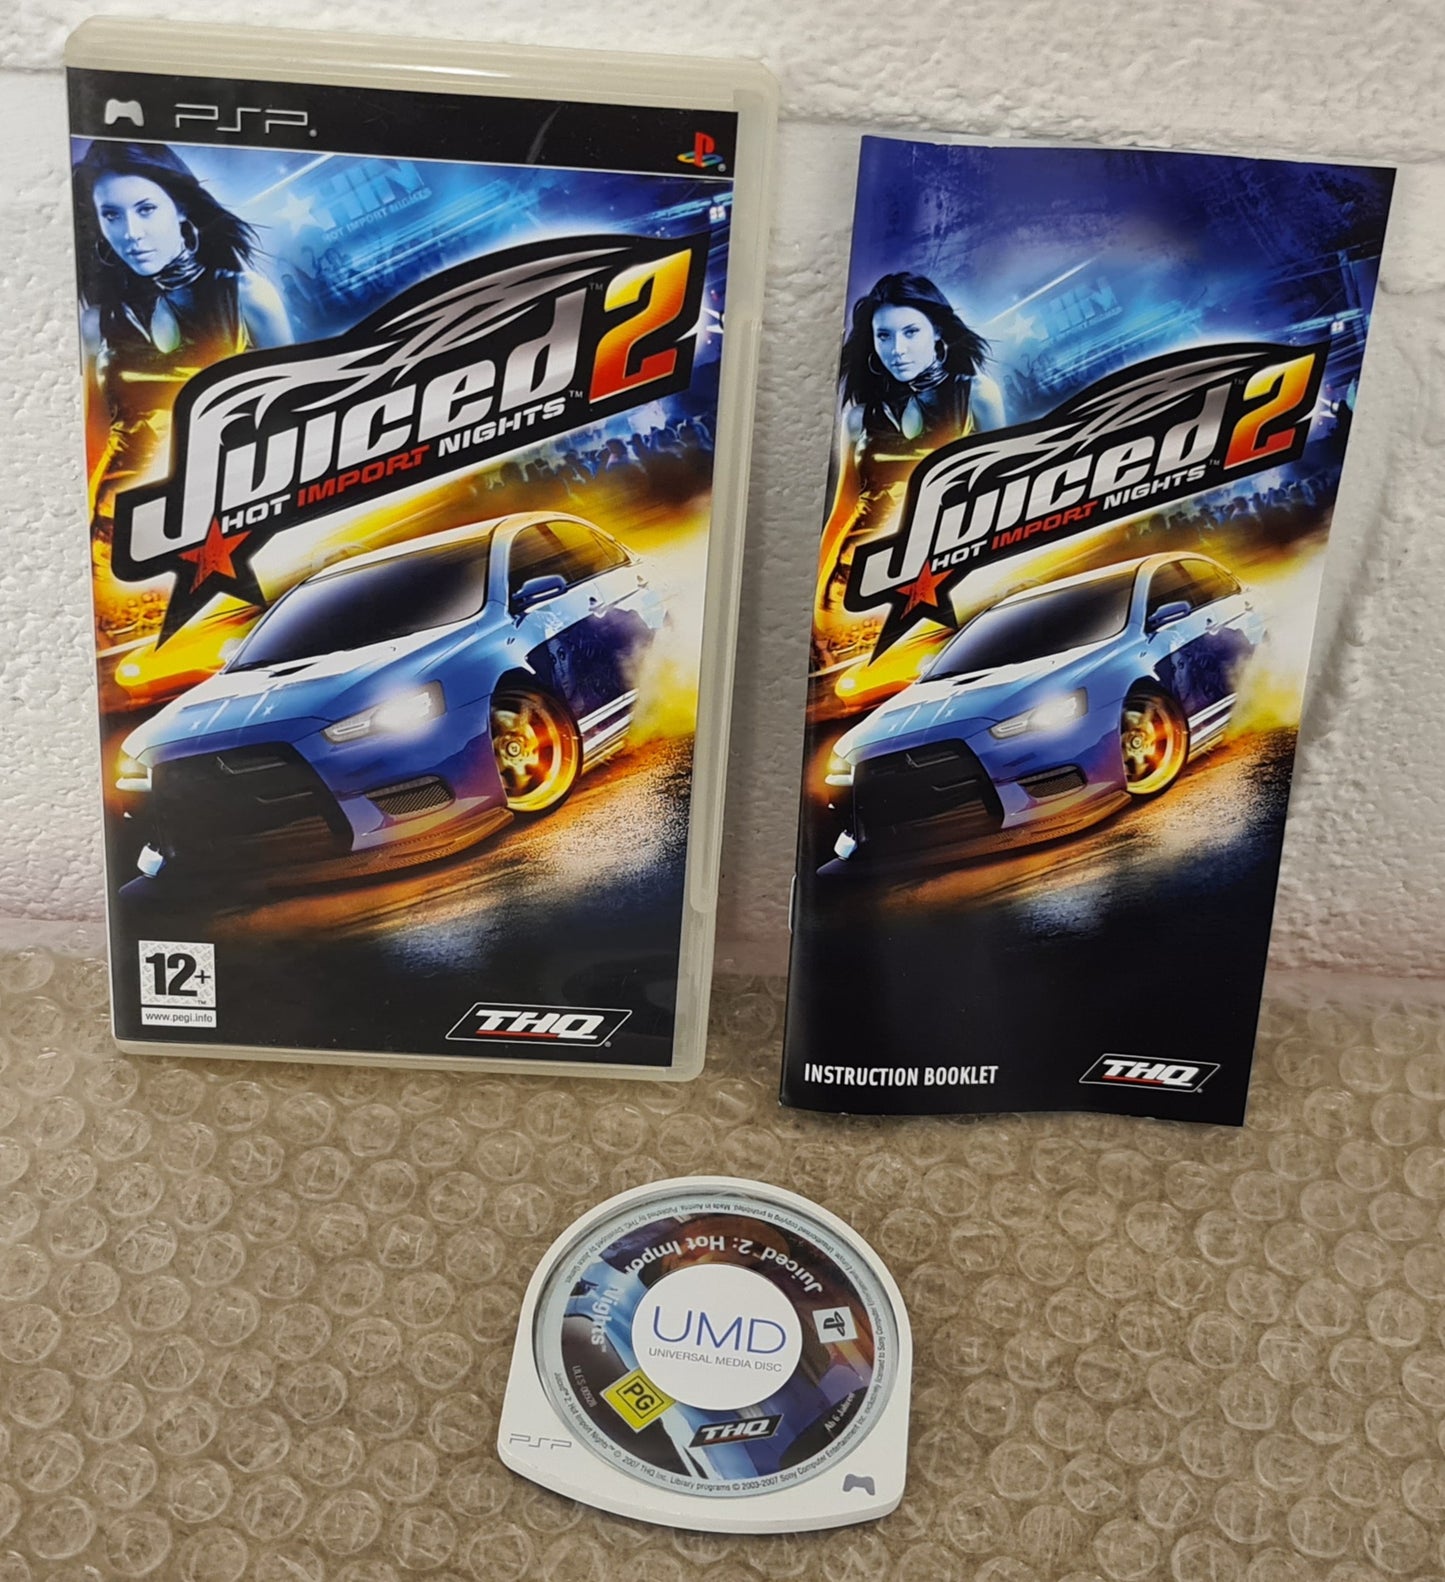 Juiced 2 Hot Import Nights Sony PSP Game